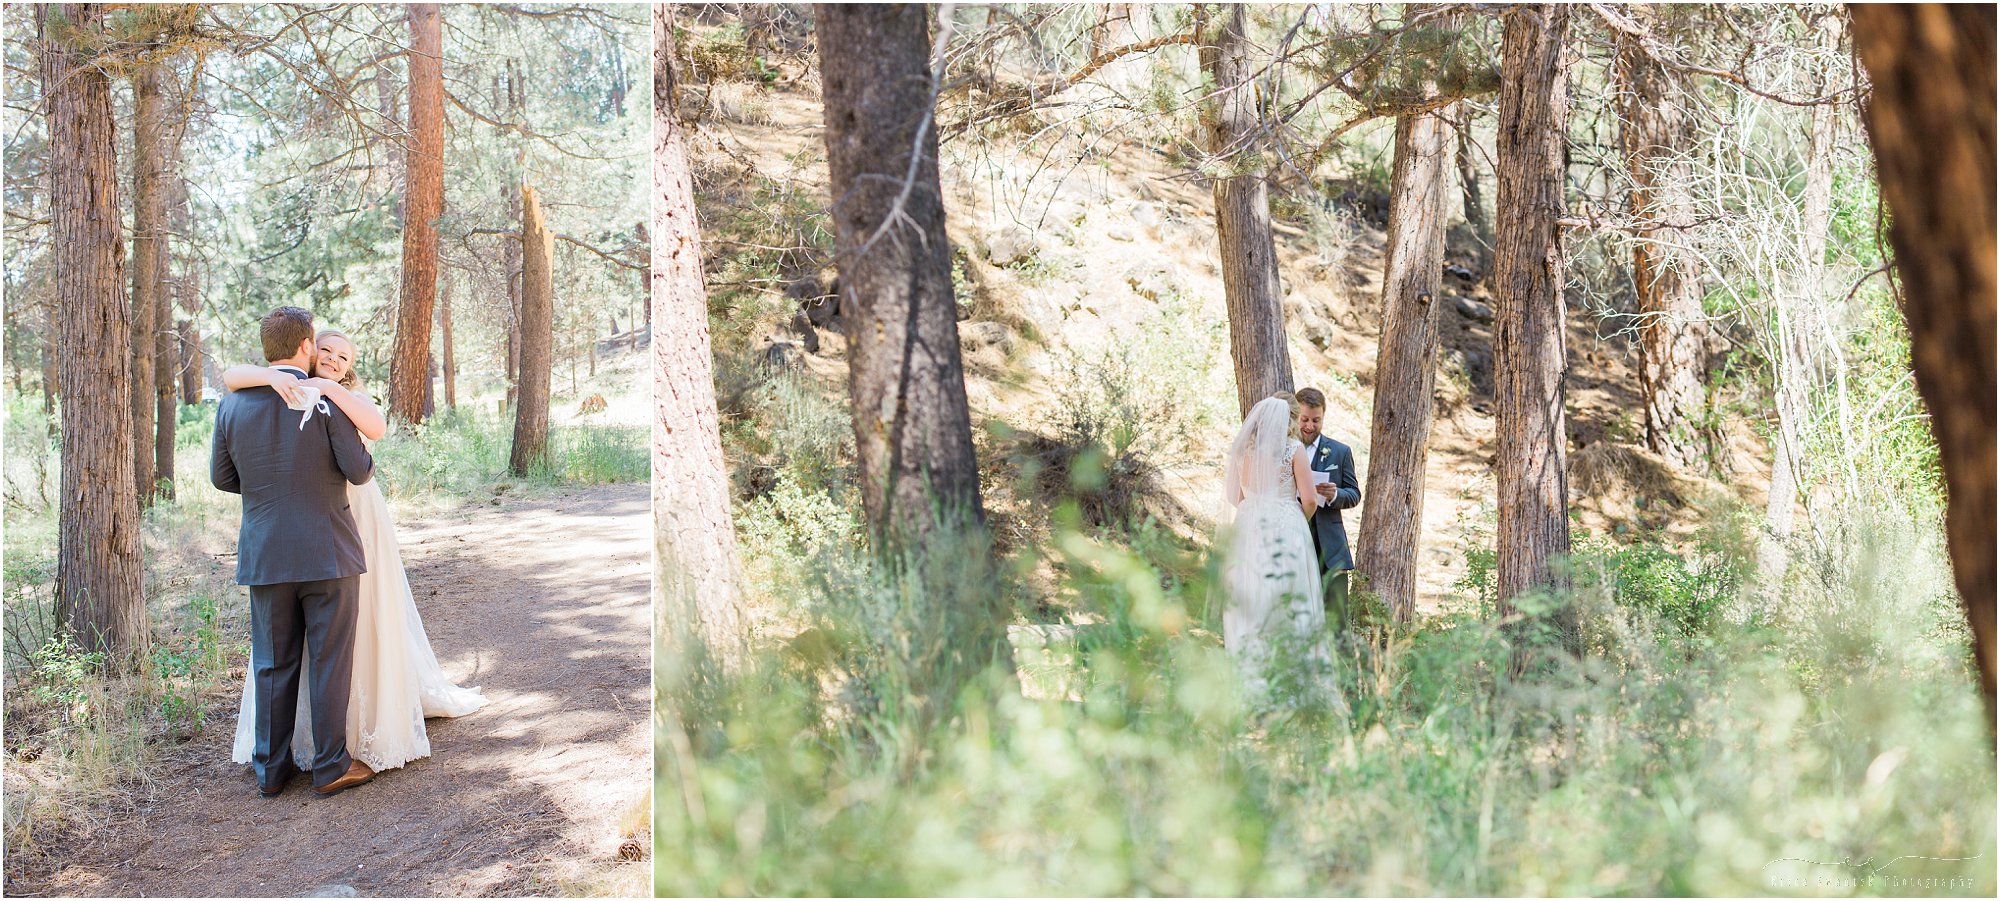 An incredible first look at Aspen Hall in Bend, Oregon captured by Erica Swantek Photography. 